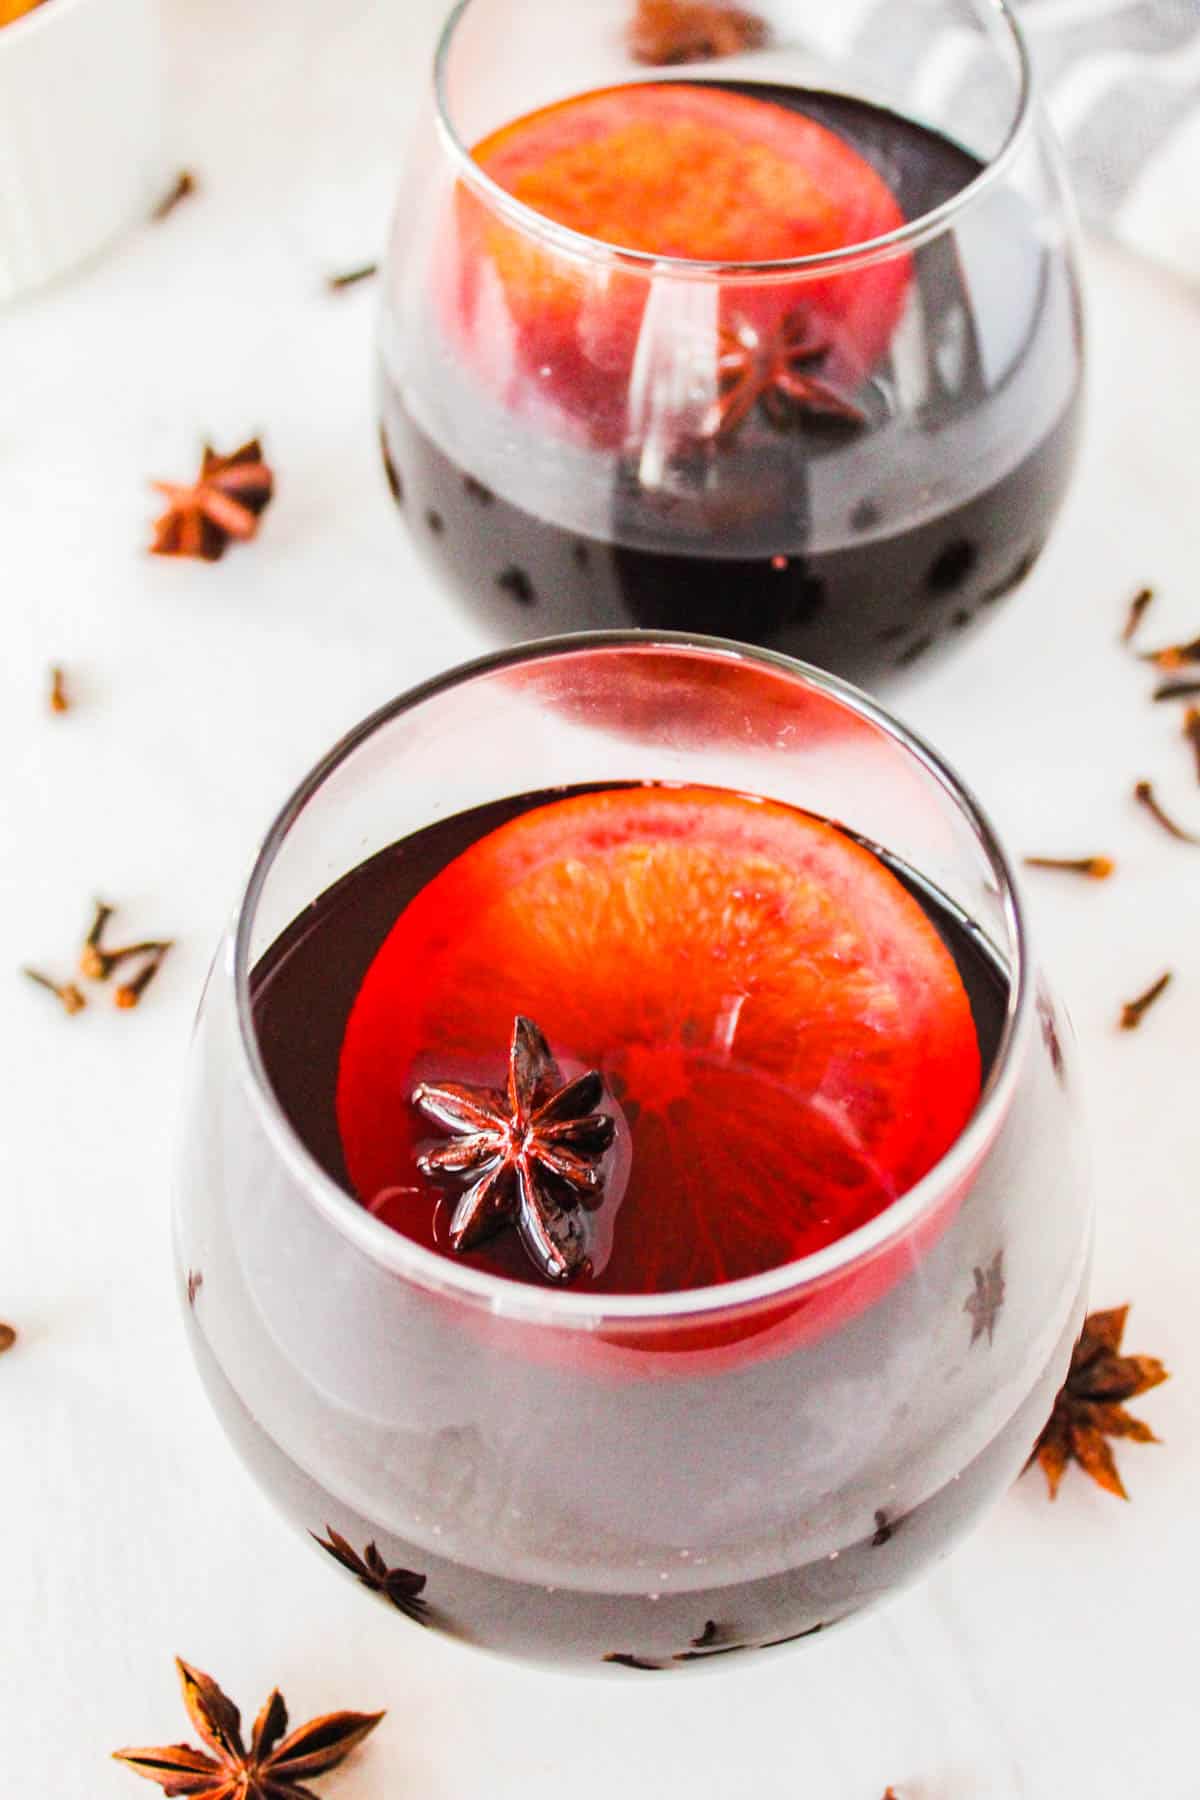 Two glasses of hot spiced wine garnished with orange wheels and star anise.